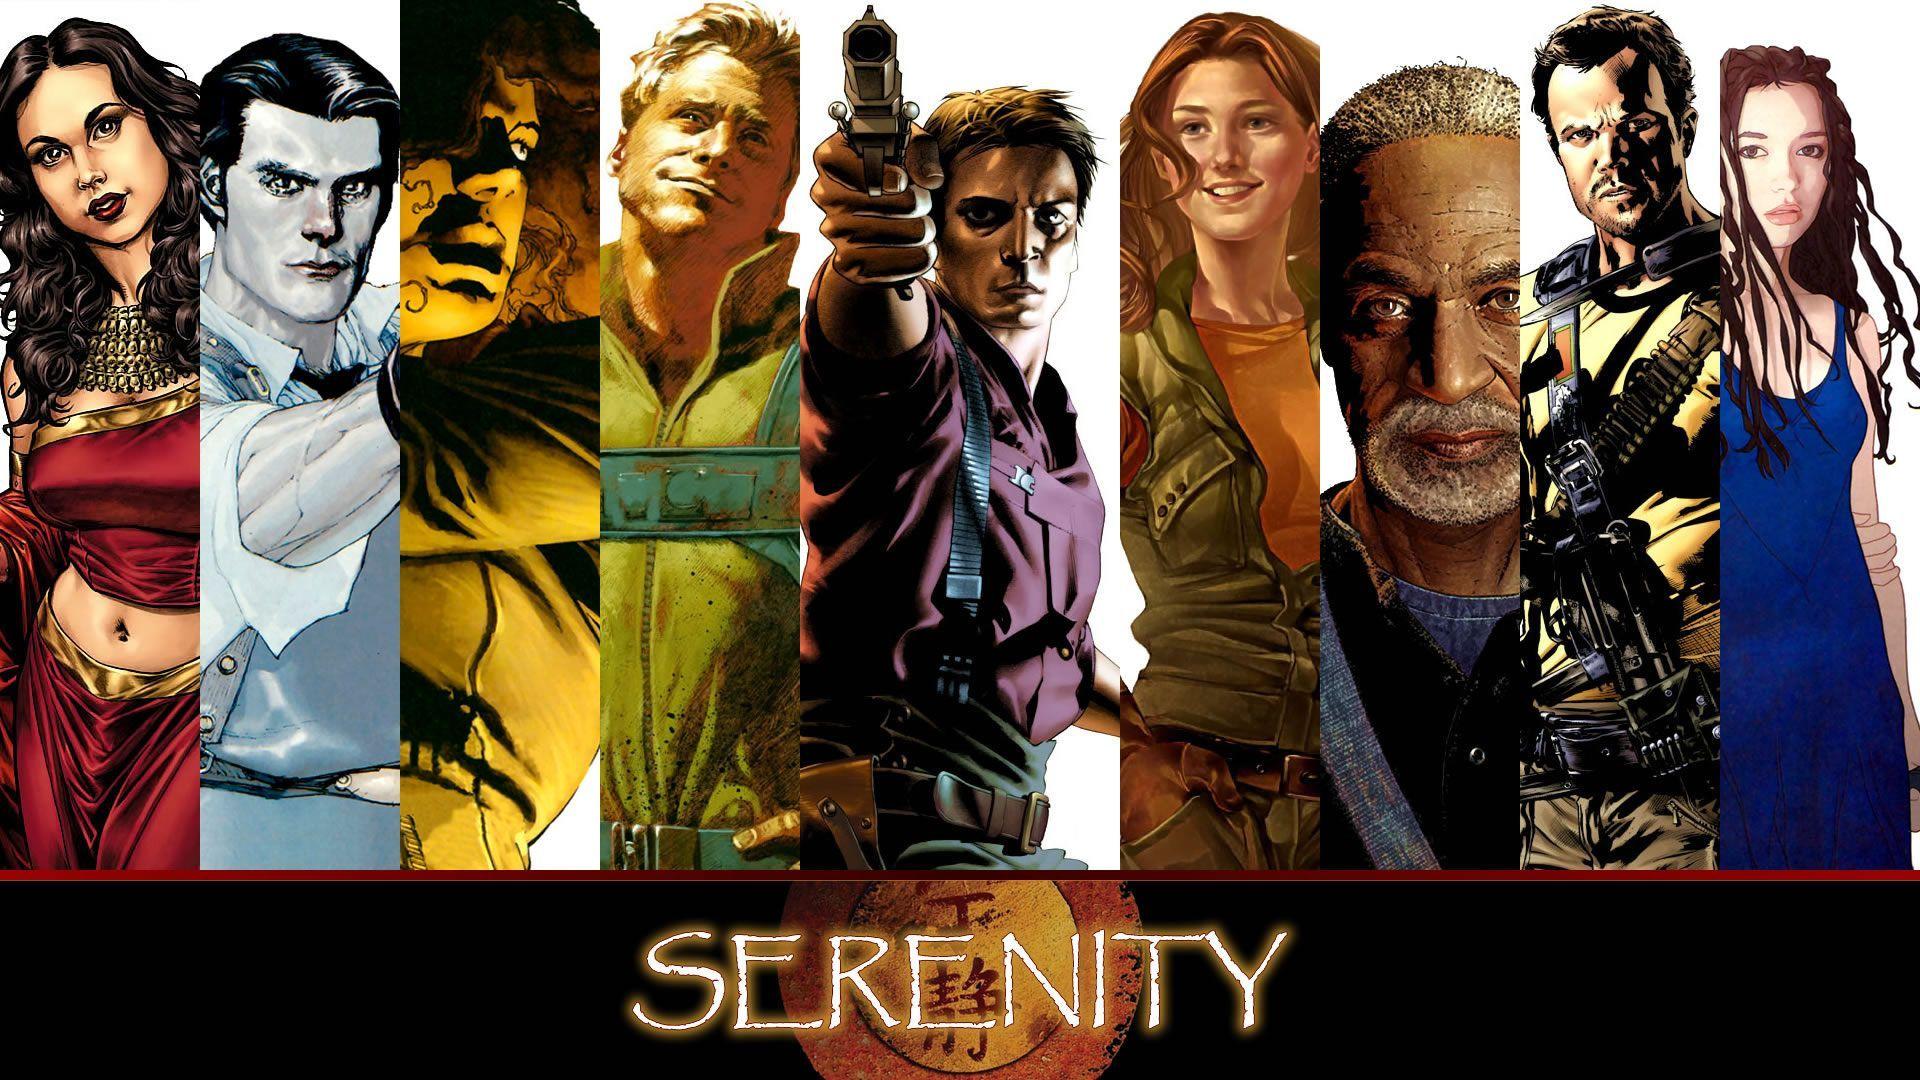 Awesome Firefly wallpaper collage using the comics